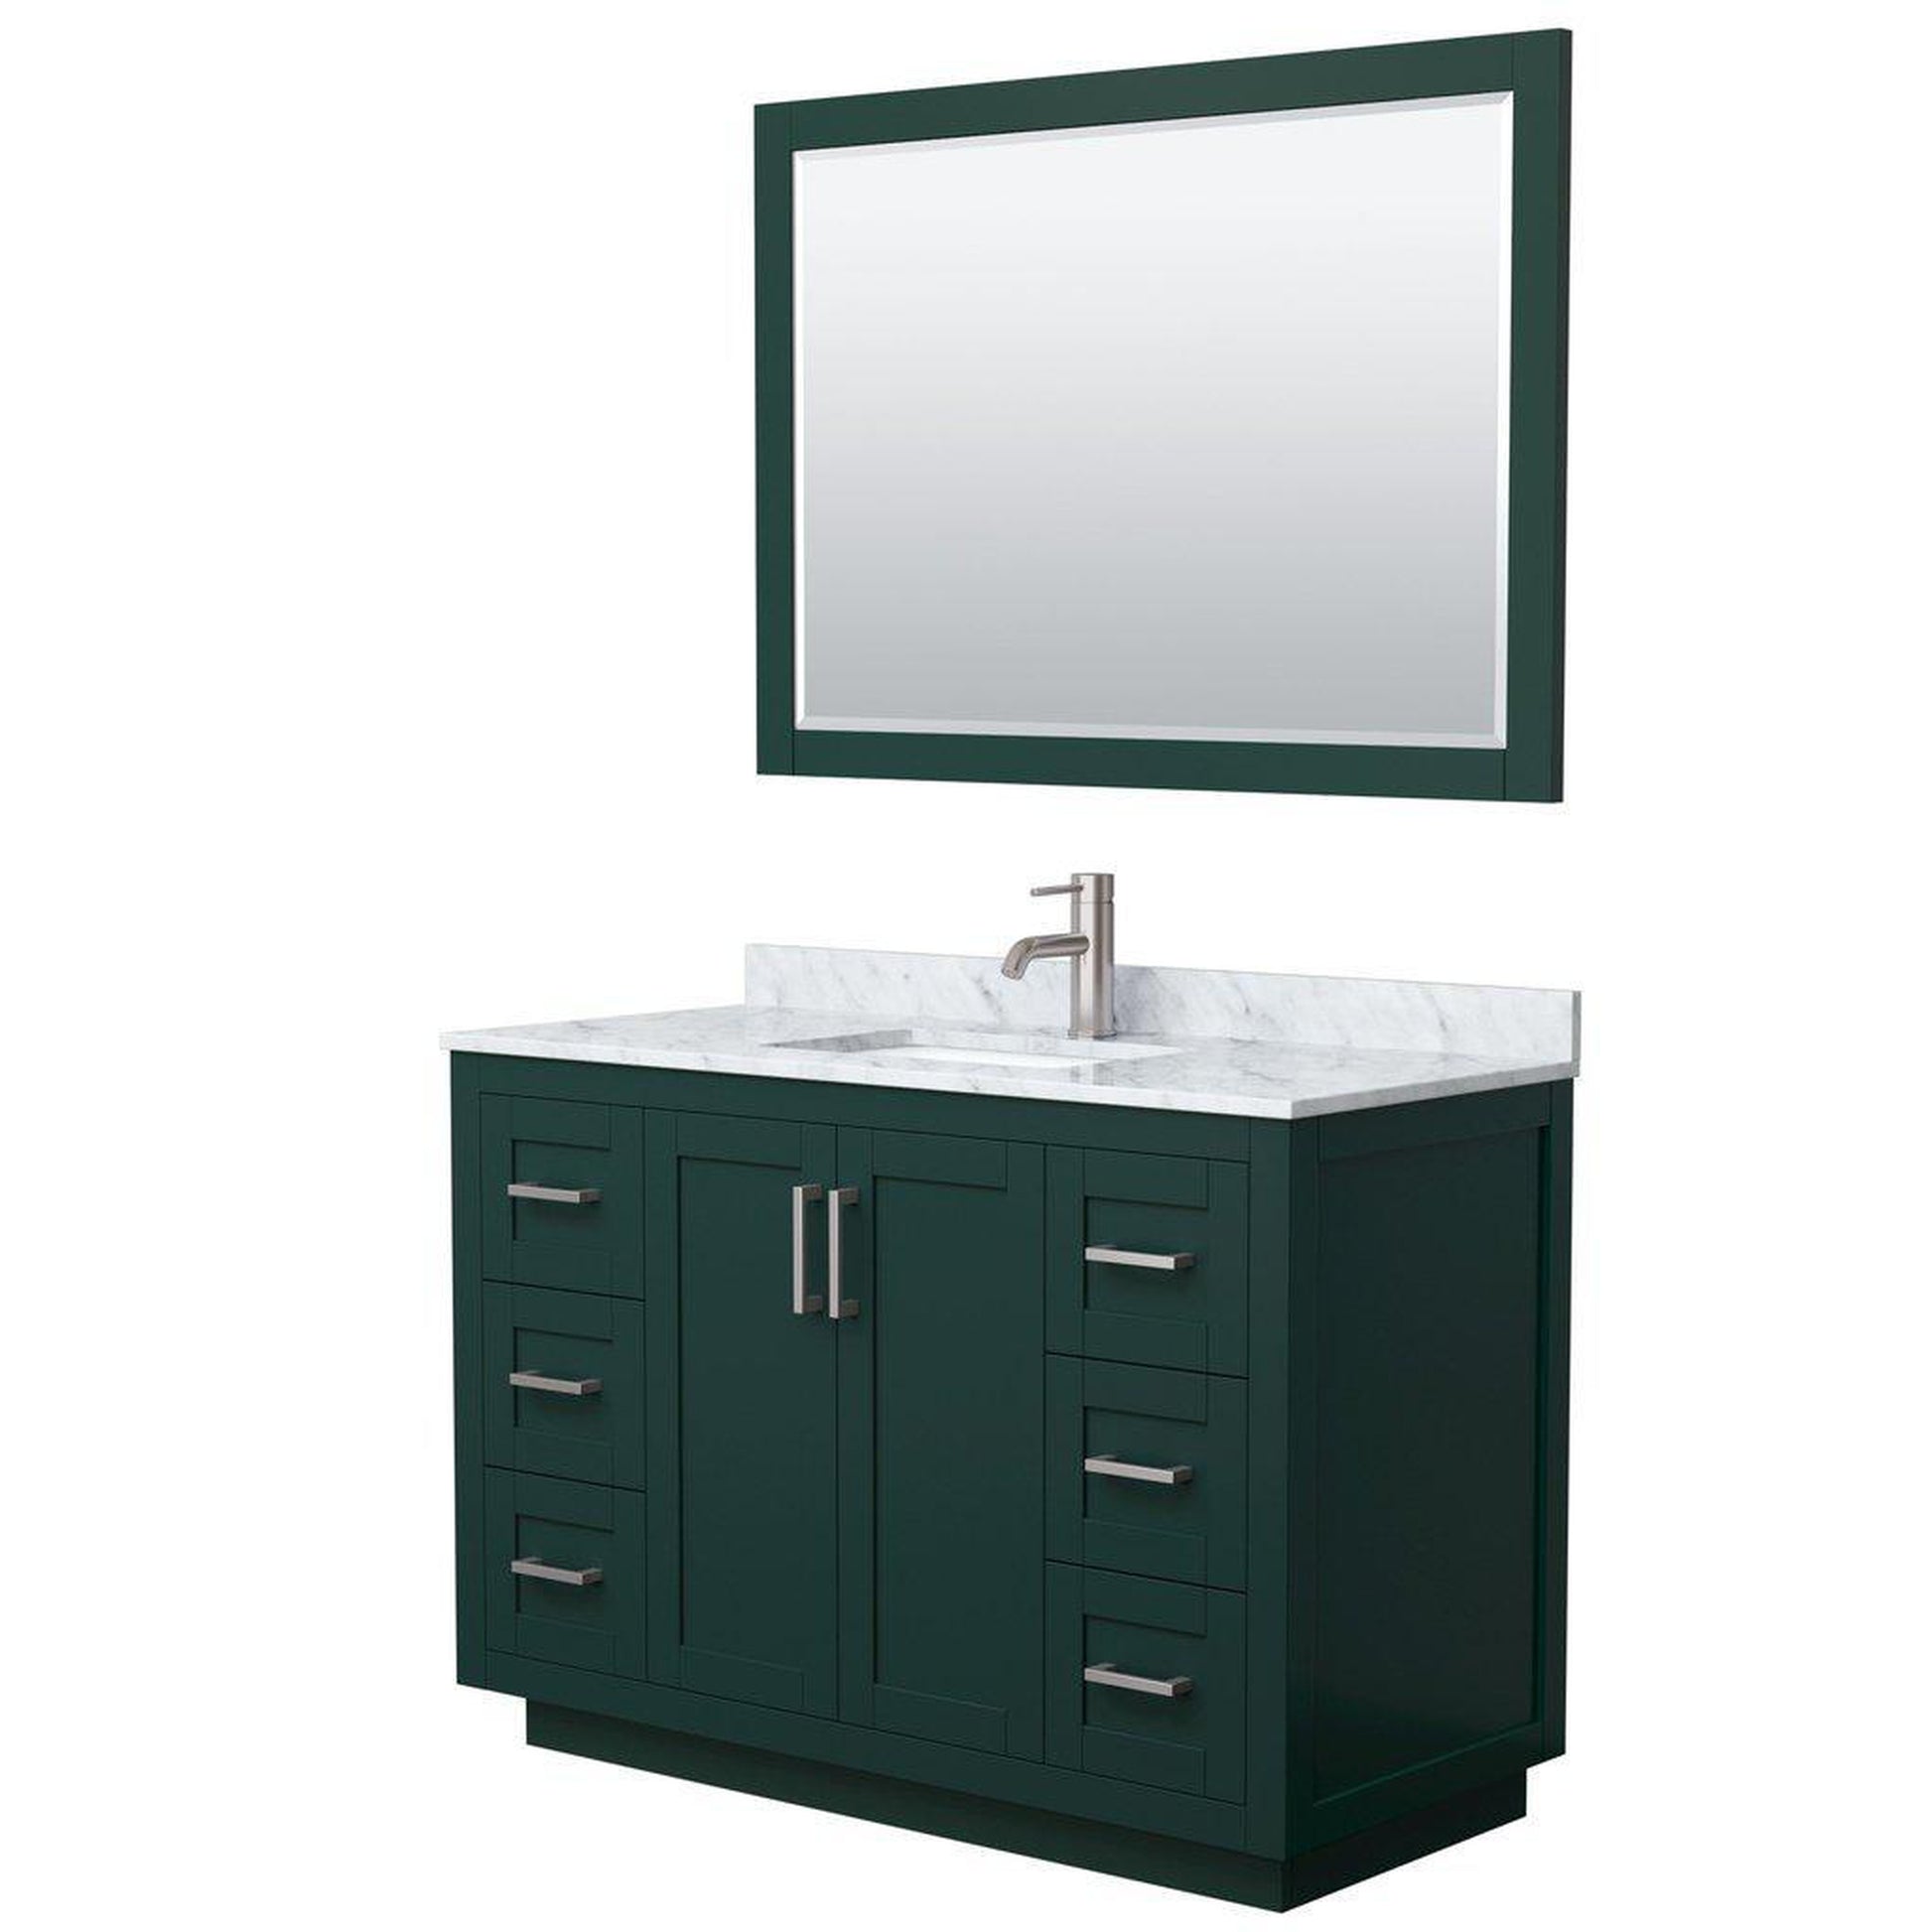 Wyndham Collection Miranda 48" Single Bathroom Green Vanity Set With White Carrara Marble Countertop, Undermount Square Sink, 46" Mirror And Brushed Nickel Trim